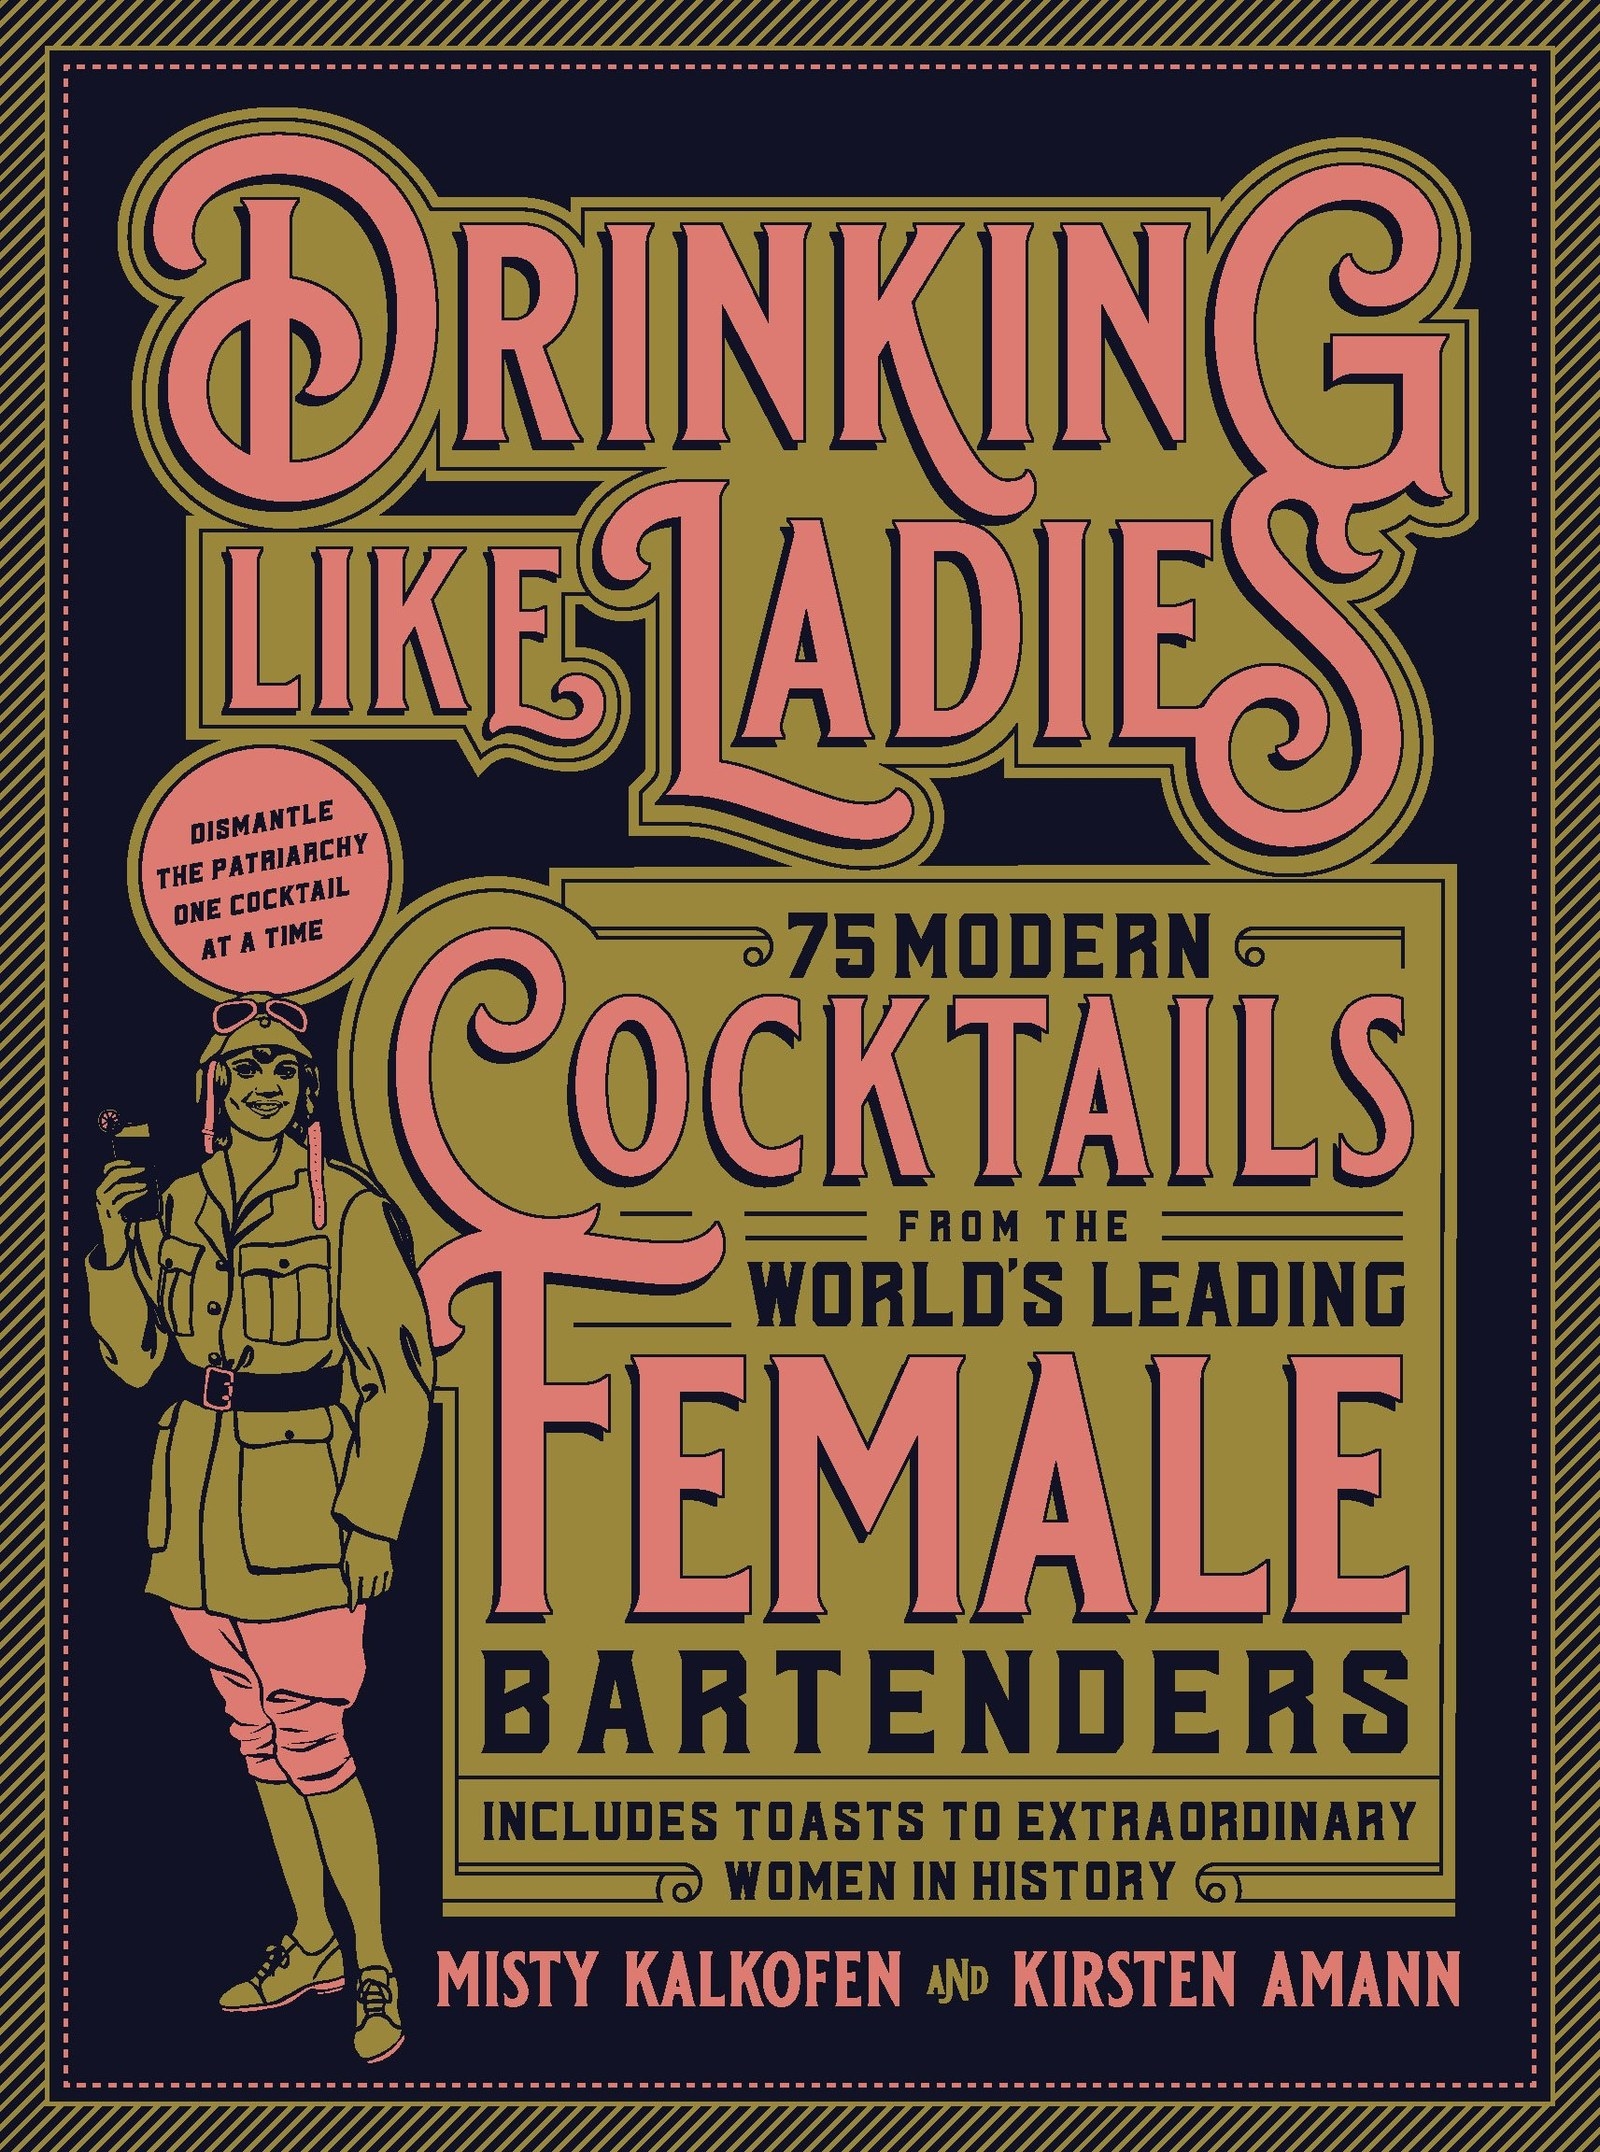 The cover: &quot;75 modern cocktails from the world&#x27;s leading femal bartender, includes toasts to extraordinary women in history&quot;